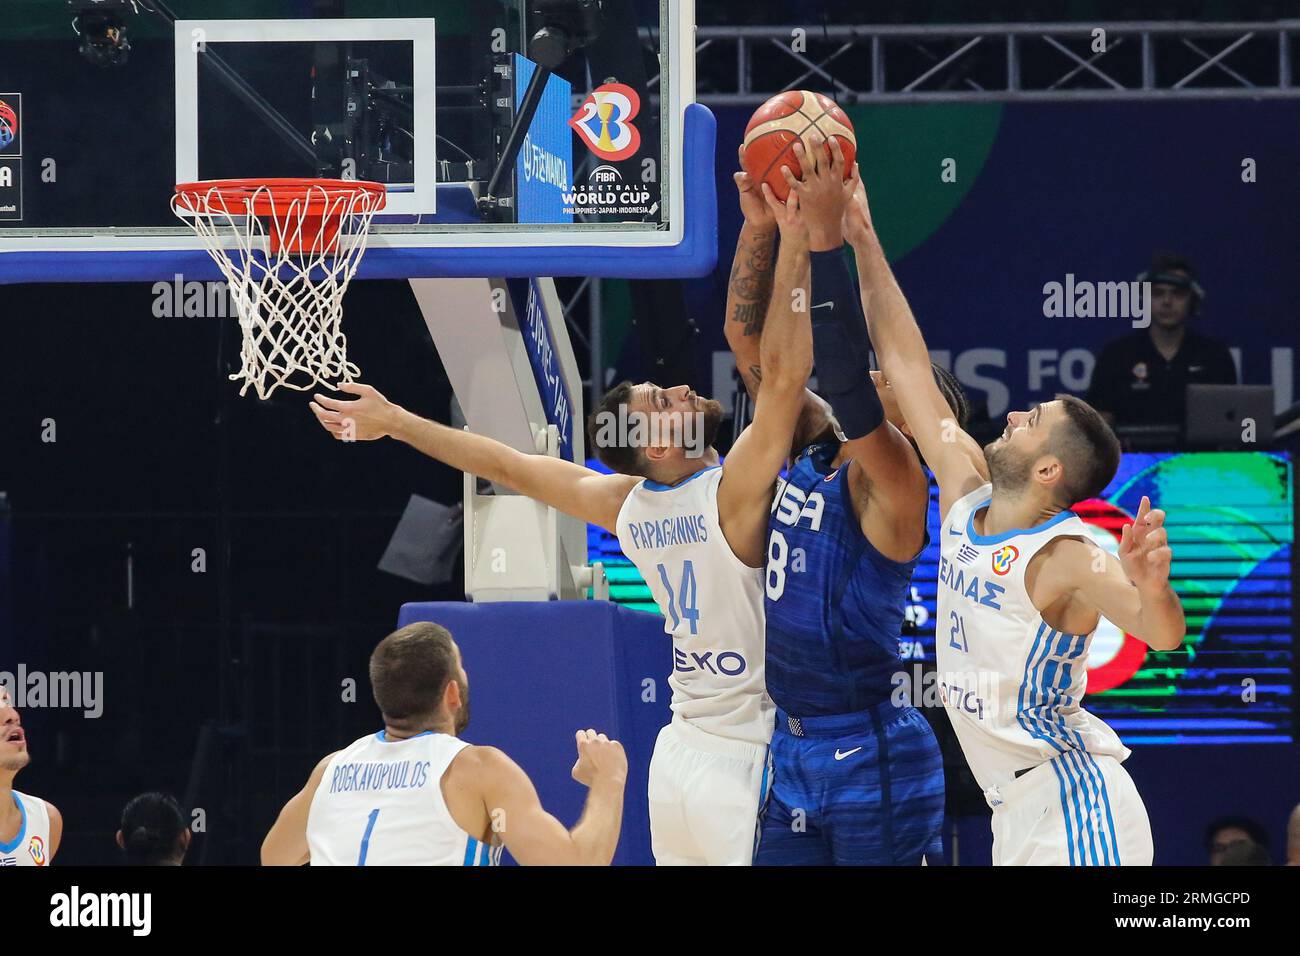 Pasay City, Philippines. 28th Aug, 2023. Paolo Banchero (C) of USA  basketball team, Ioannis Papapetrou (R) and Georgios Papagiannis (L) of  Greece basketball team seen in action during the FIBA Men's Basketball